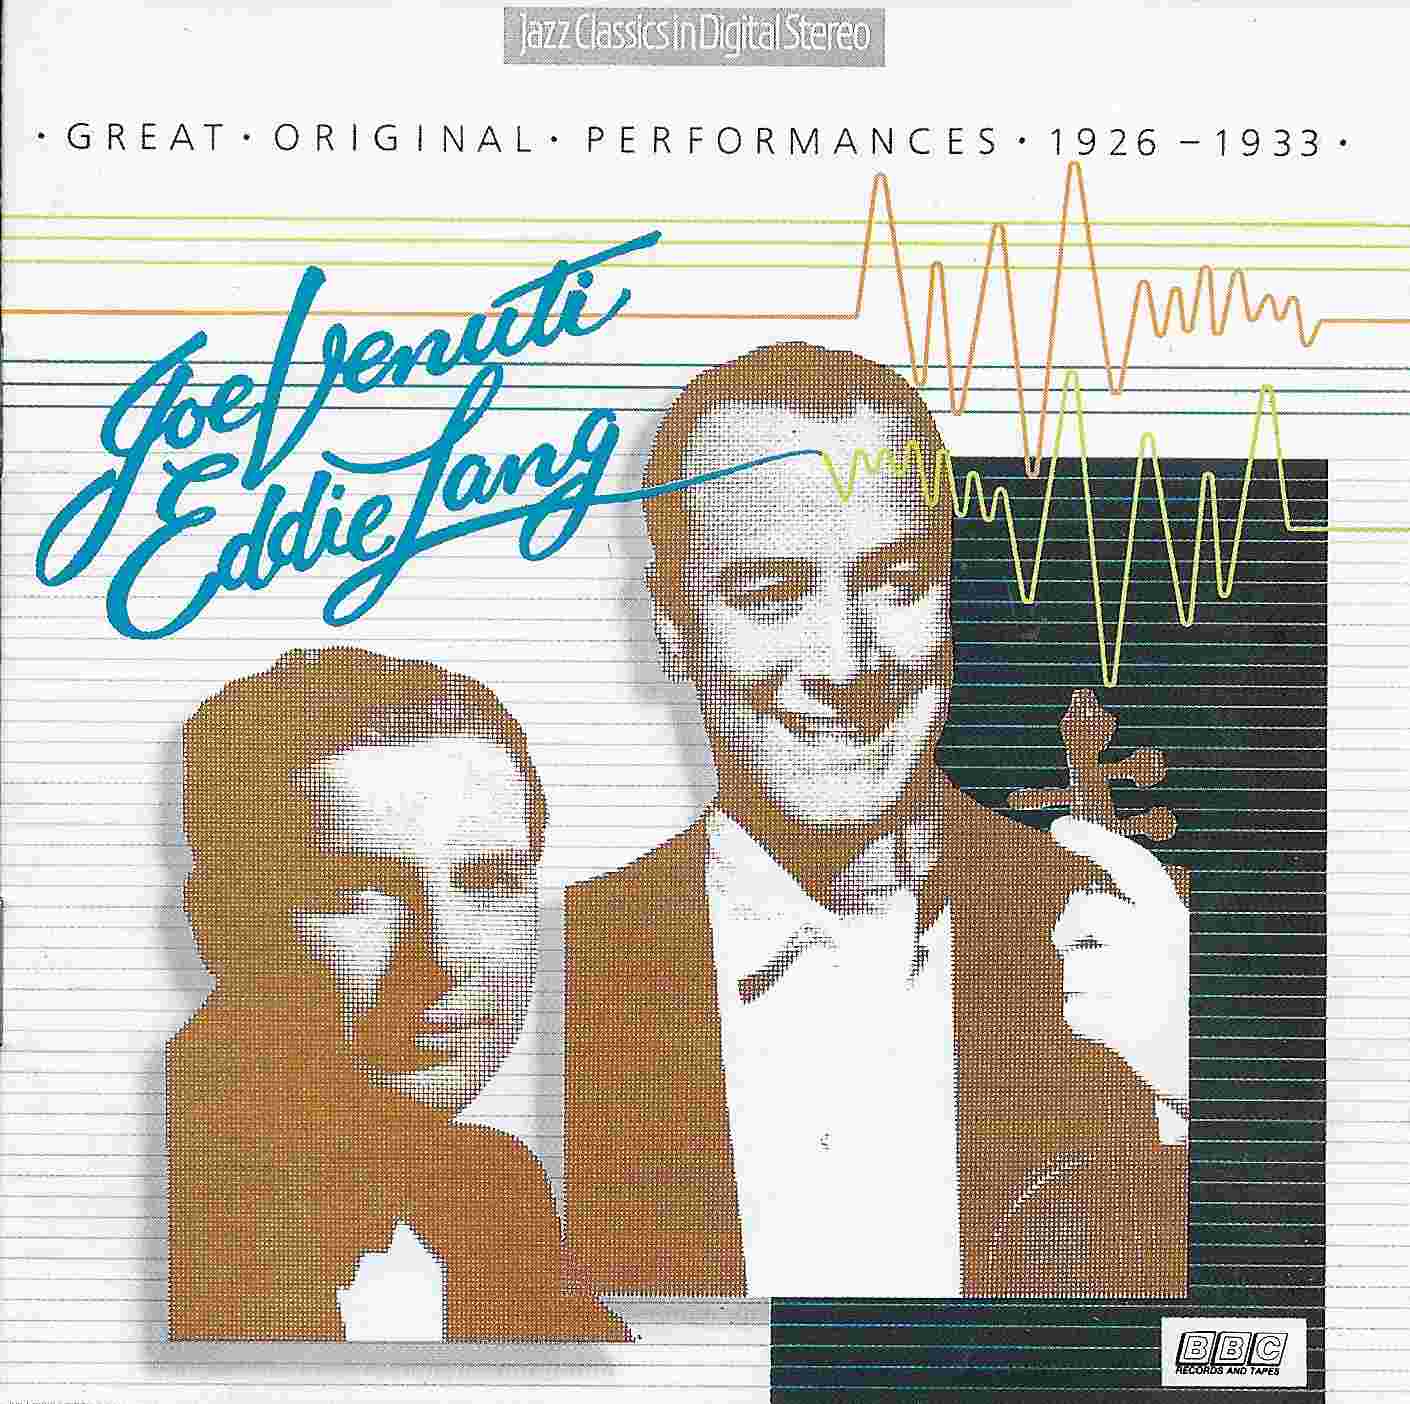 Picture of BBCCD644 Jazz classics - Joe Venuti and Eddie Lang by artist Joe Venuti / Eddie Lang from the BBC cds - Records and Tapes library